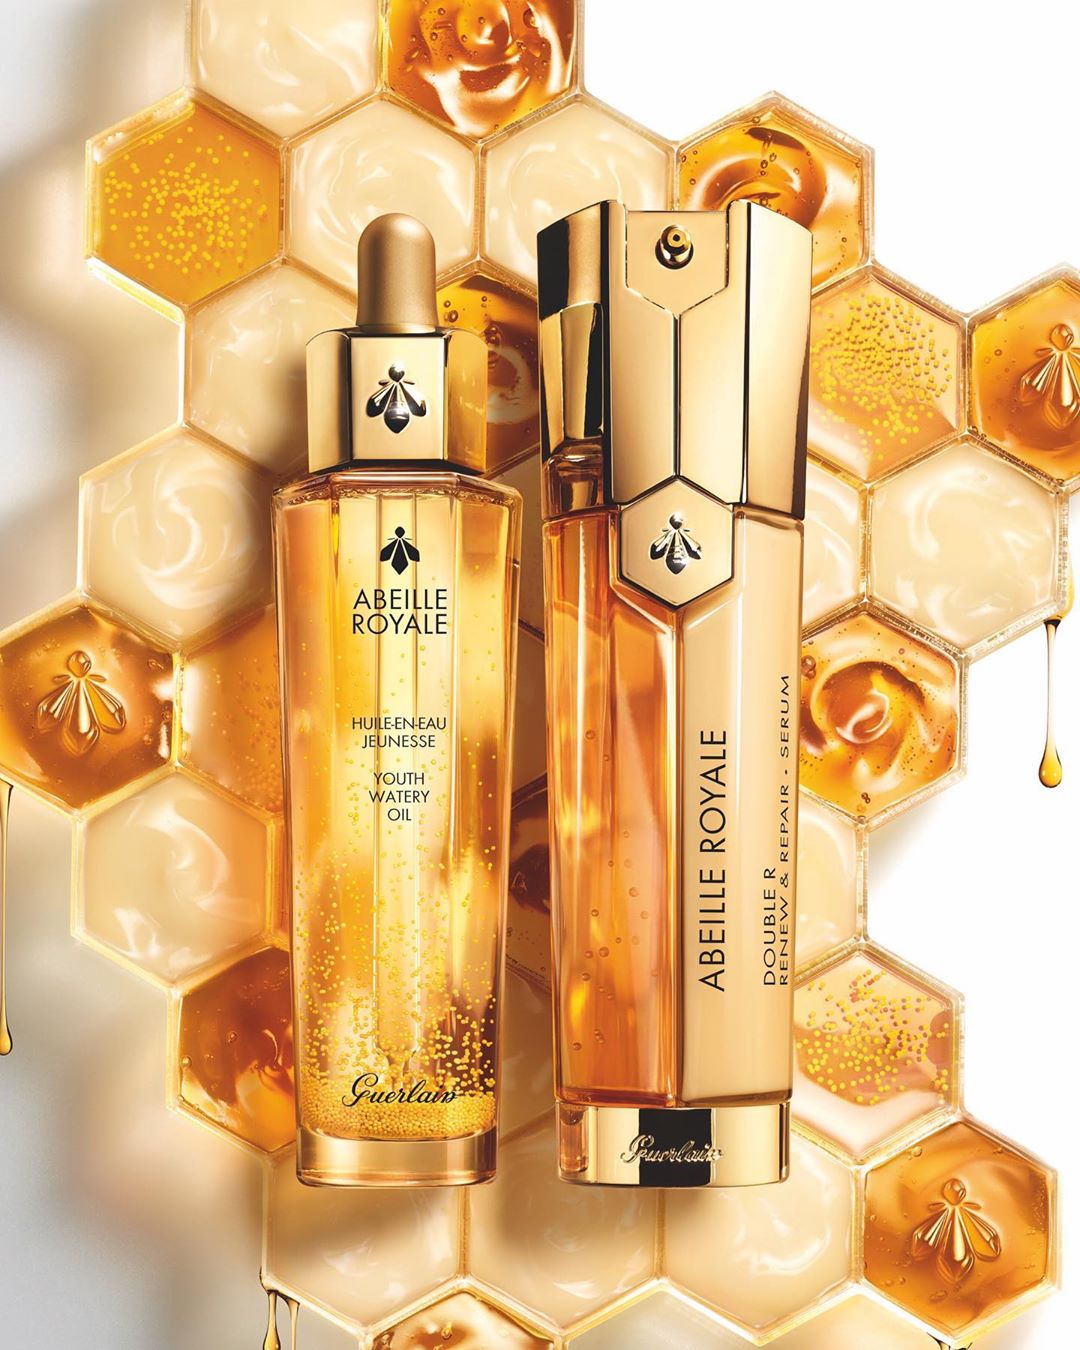 Guerlain - A duo powered by bees 🐝, Abeille Royale Youth Watery Oil & Double R Serum celebrate the power of sustainably sourced bee products and their incredible skincare benefits.

An anti-aging, mul...